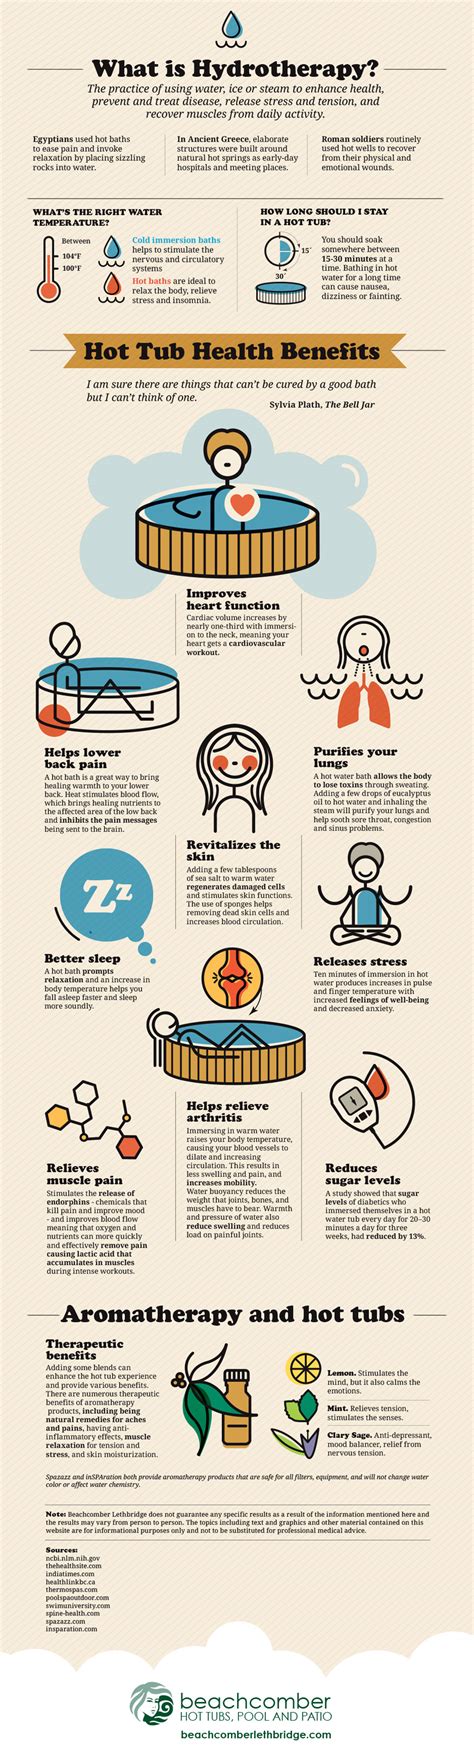 Hot Tub Health Benefits Infographic Beachcomber 13677 Hot Sex Picture